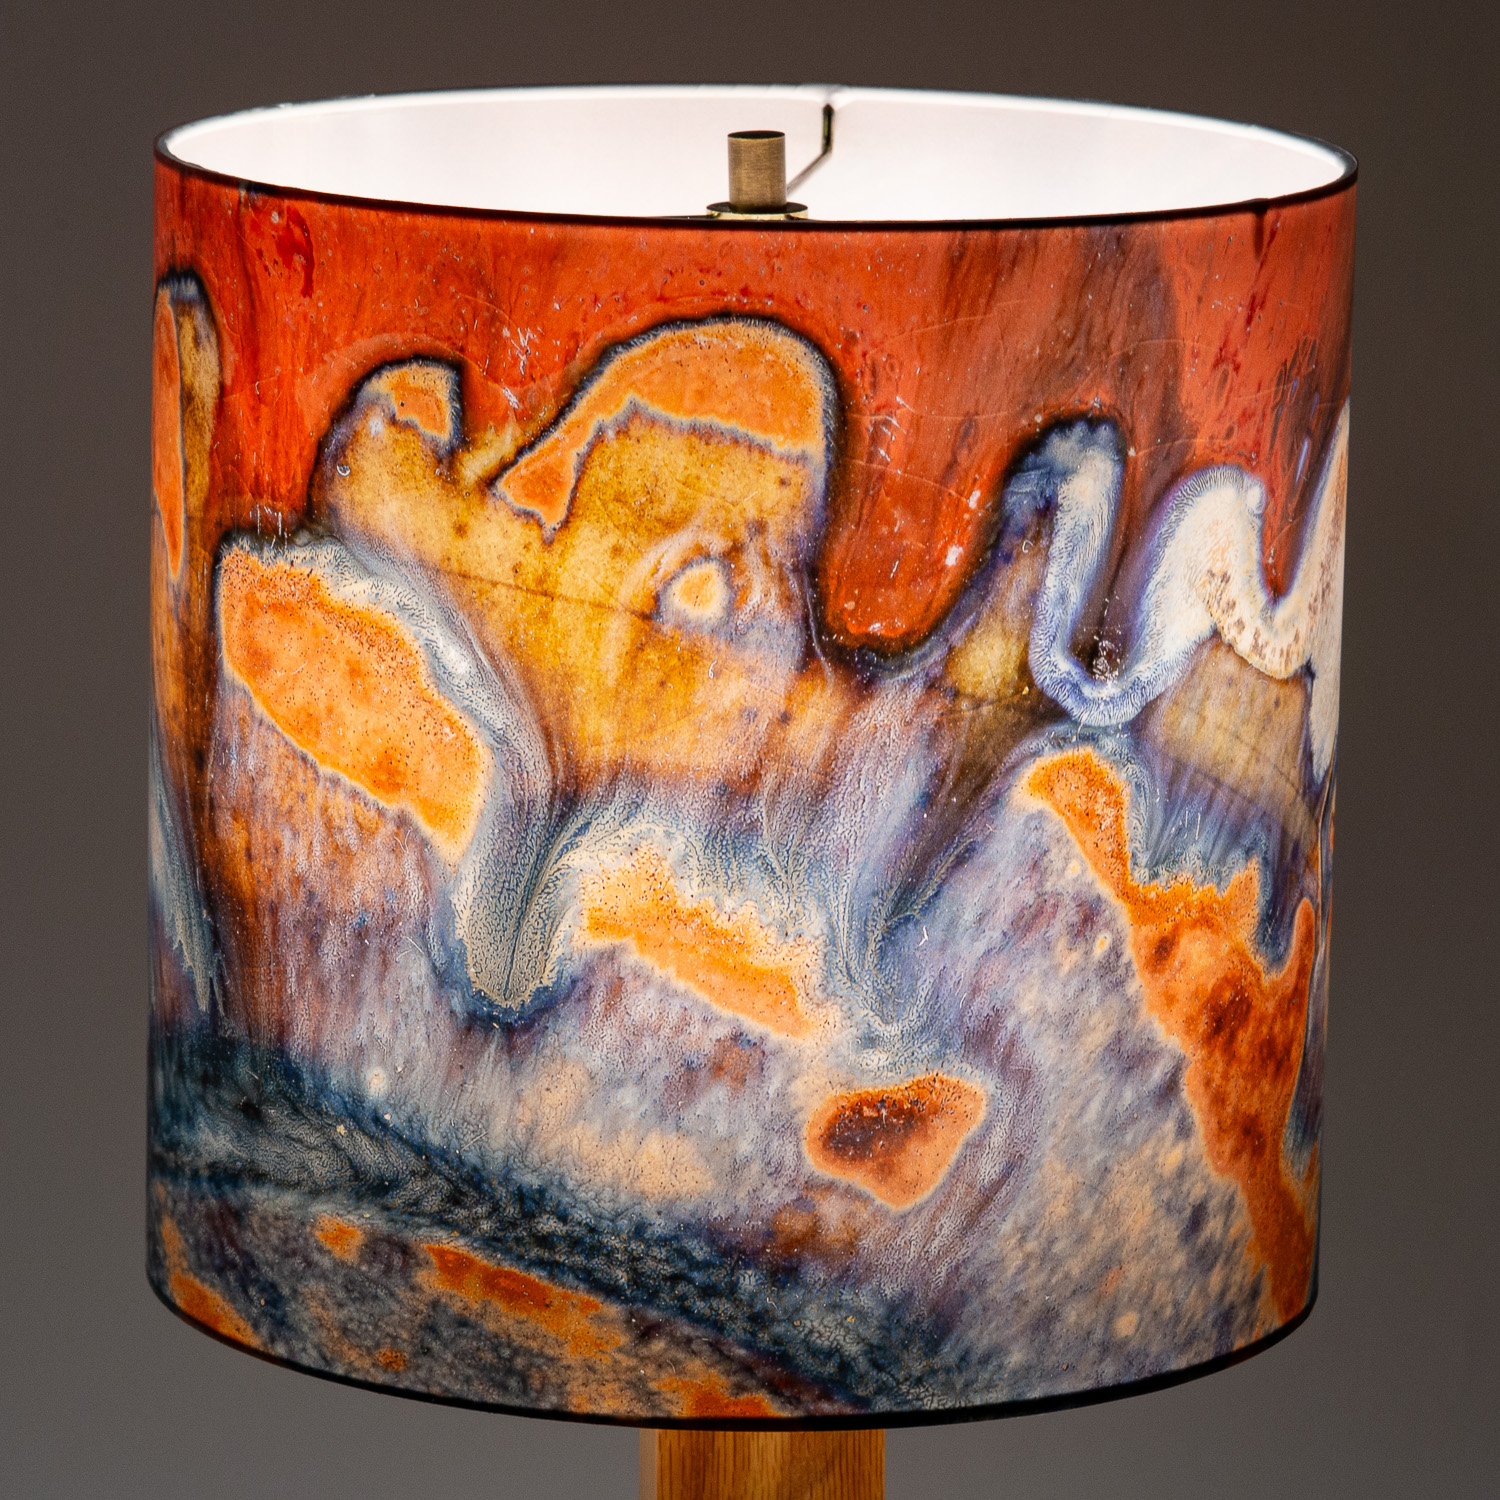 103: Closeup image of reduction-fired pottery by Scott Frankenberger -- Photo on Lamp shade by David Elmore